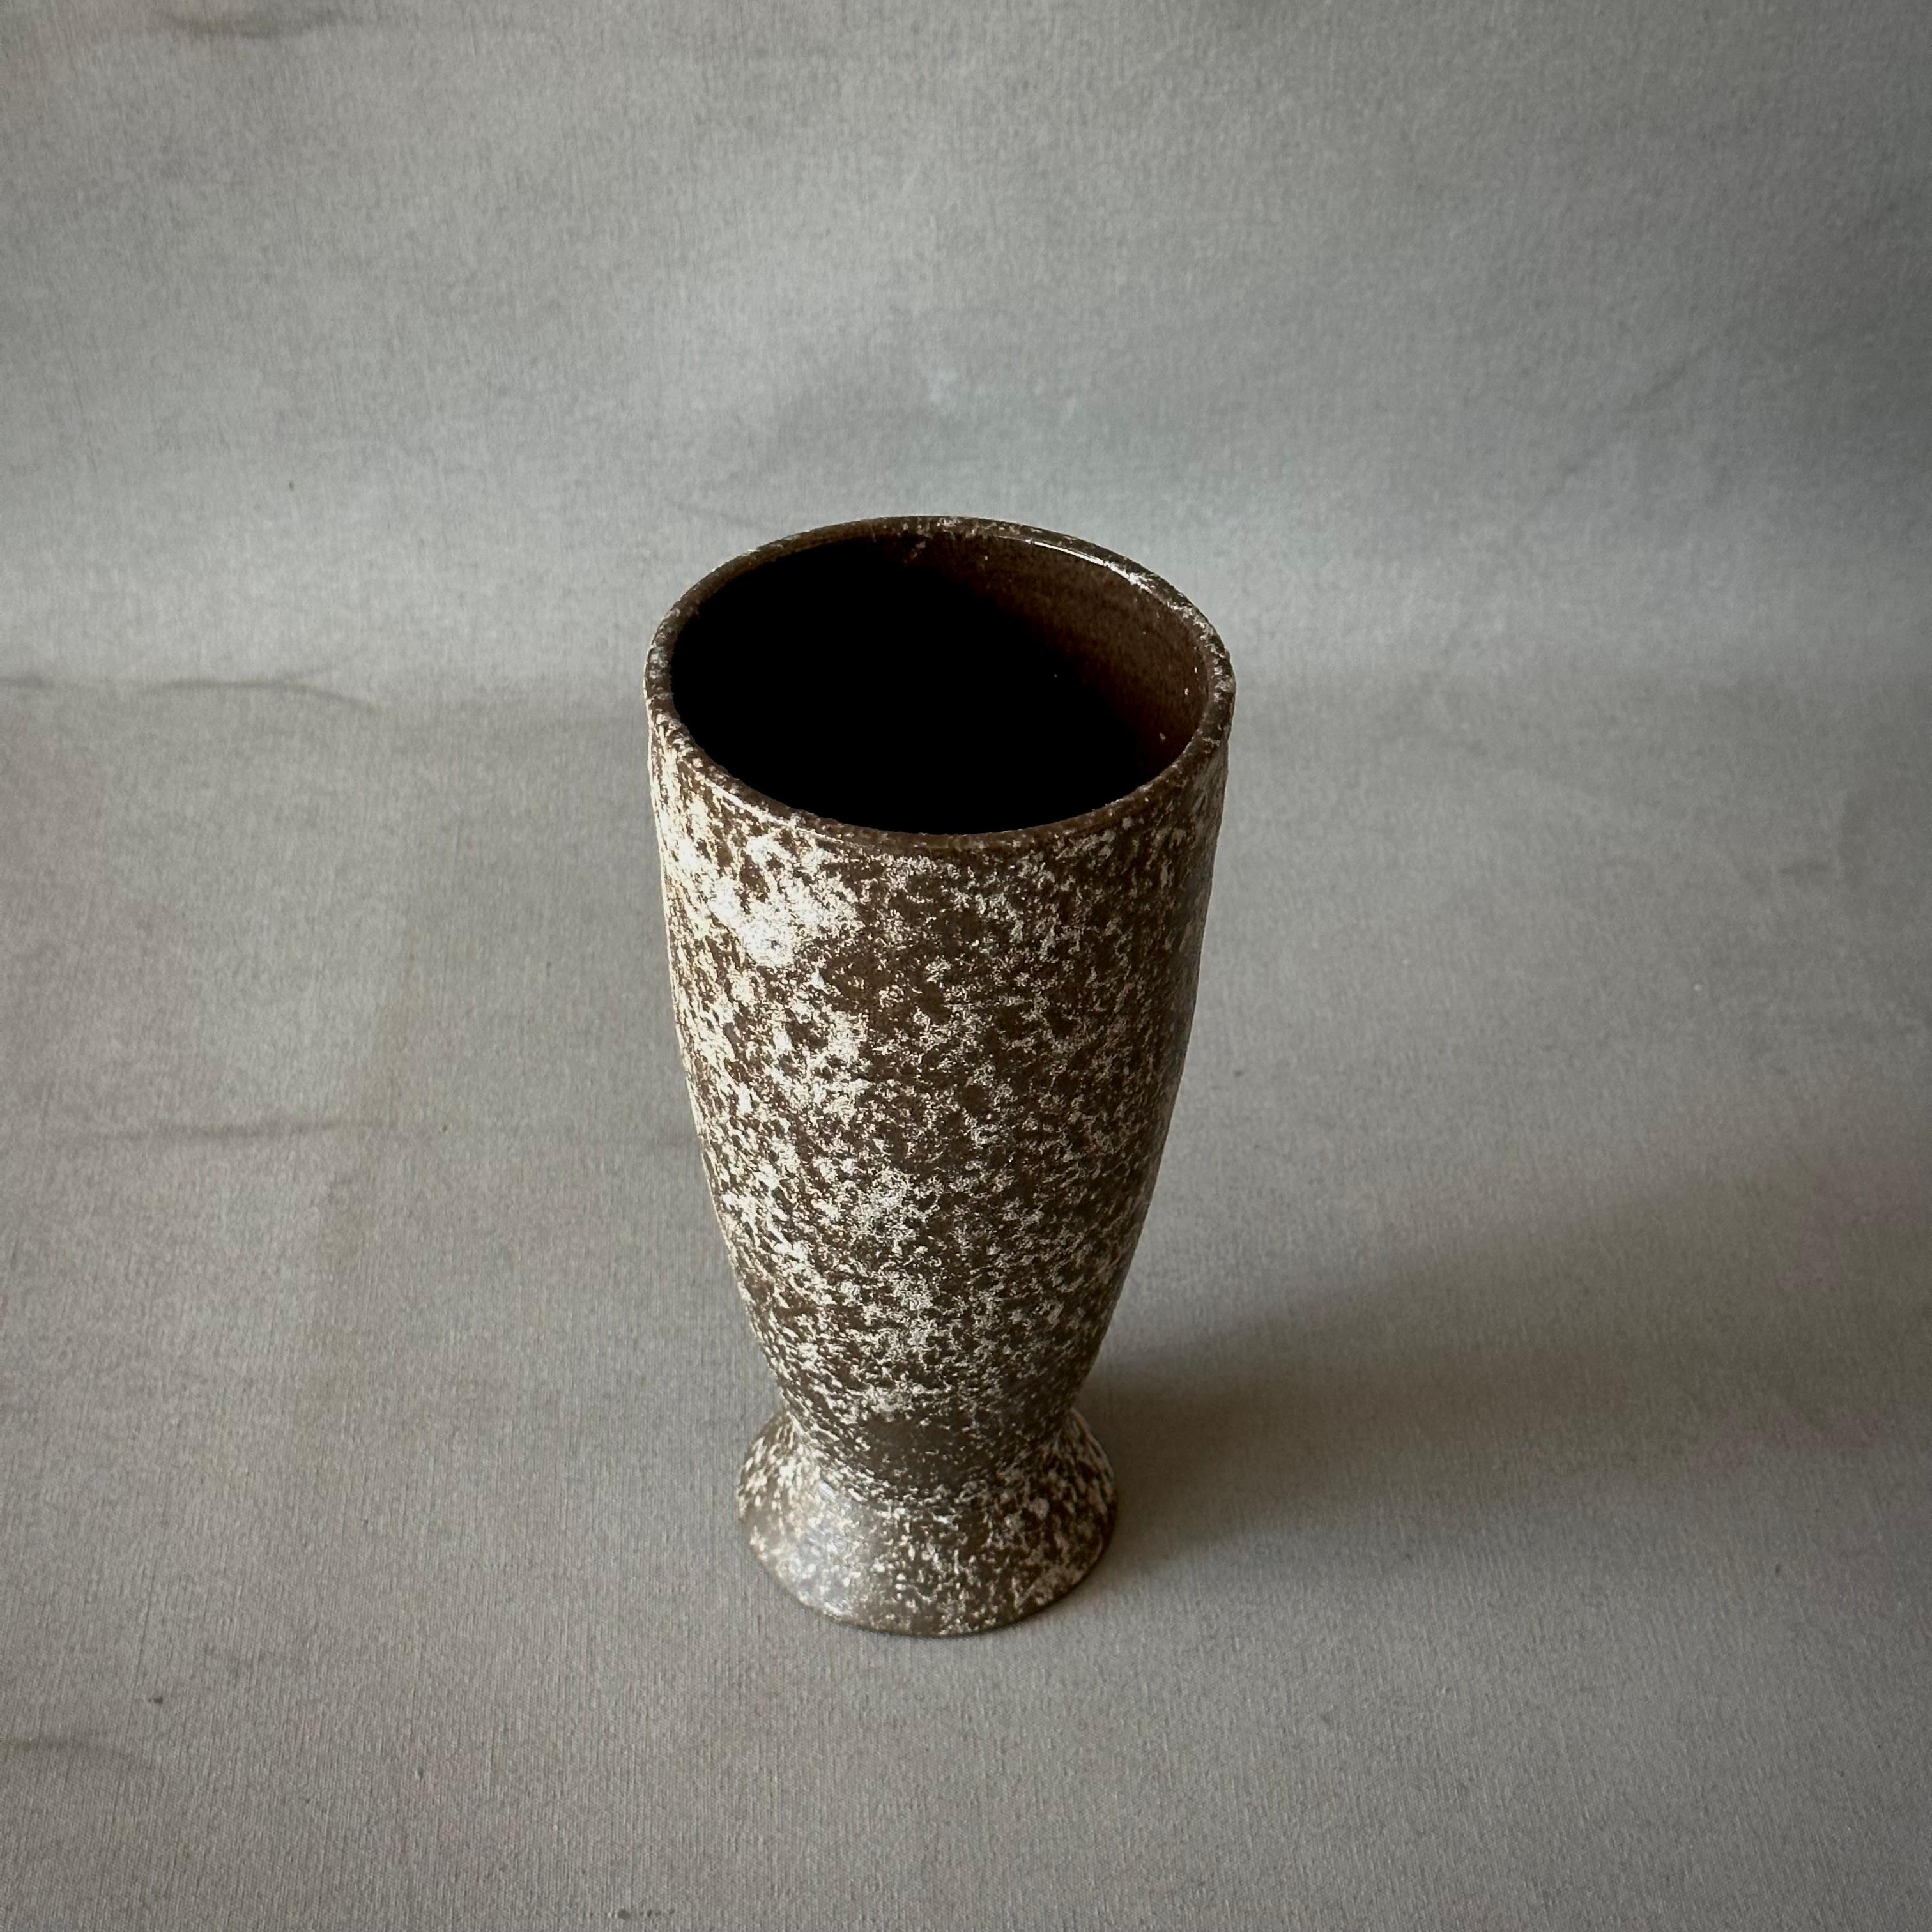 Brown studio pottery vase with grey splatter finish.

Sweden, circa 1970

Dimensions: 4W x 4D x 8H